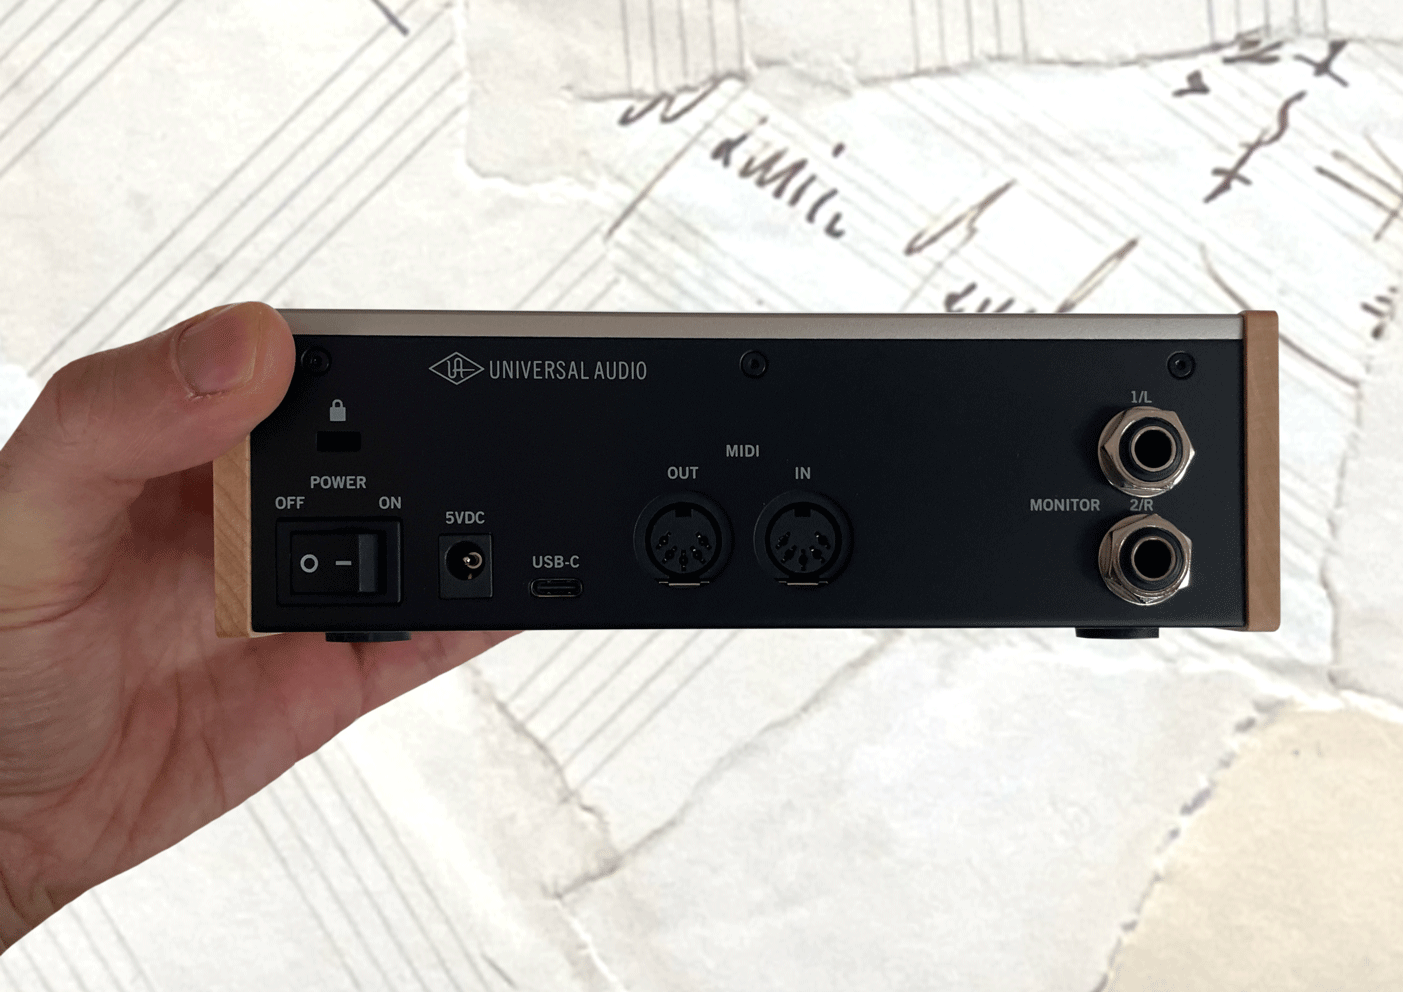 Back panel of the Universal Audio Volt 276